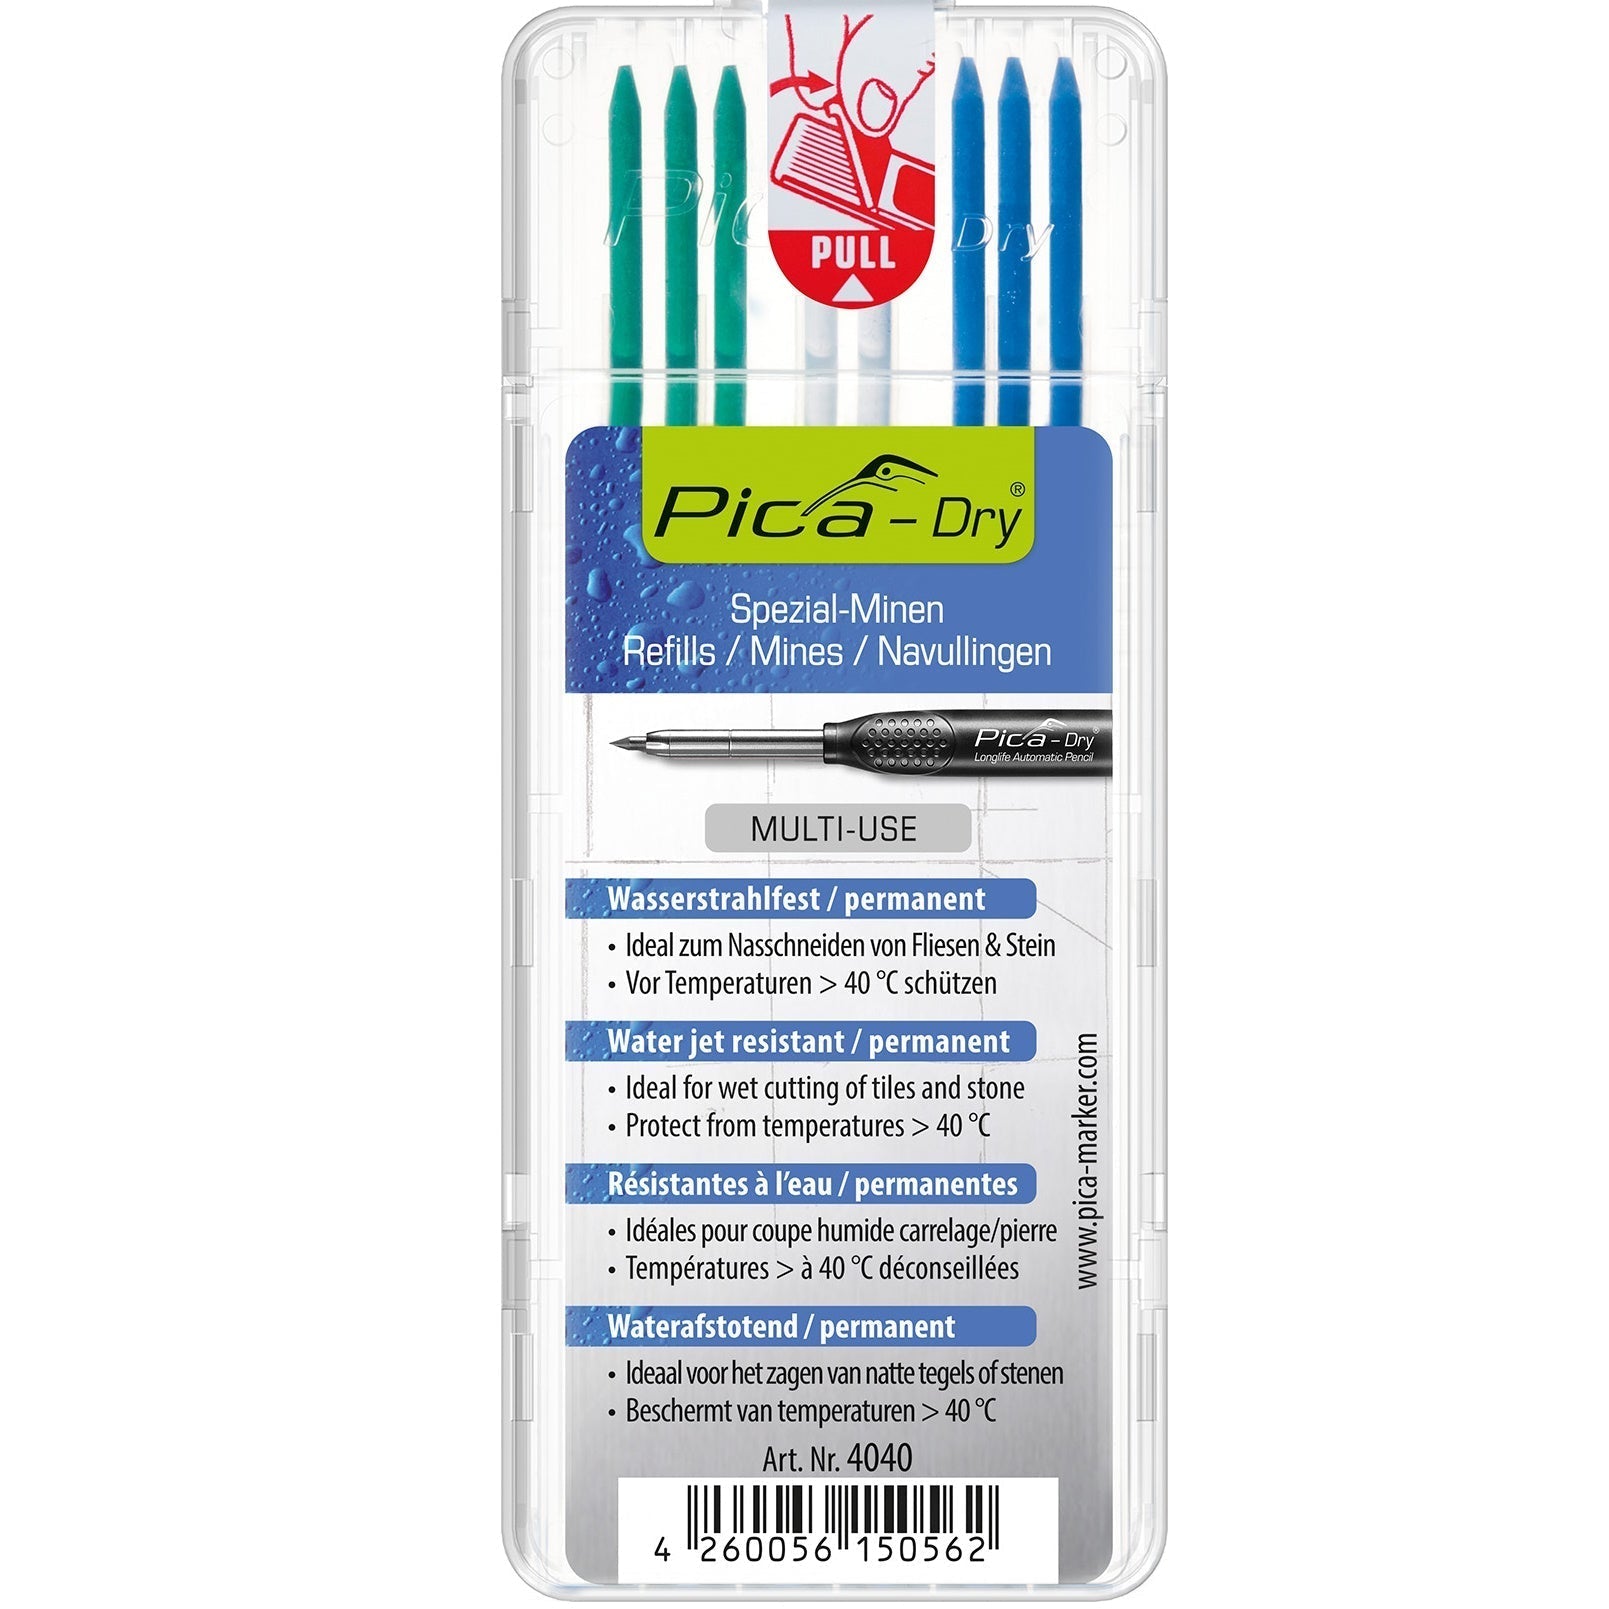 Pica Dry Refills Green, White Blue 4040 Power Tool Services